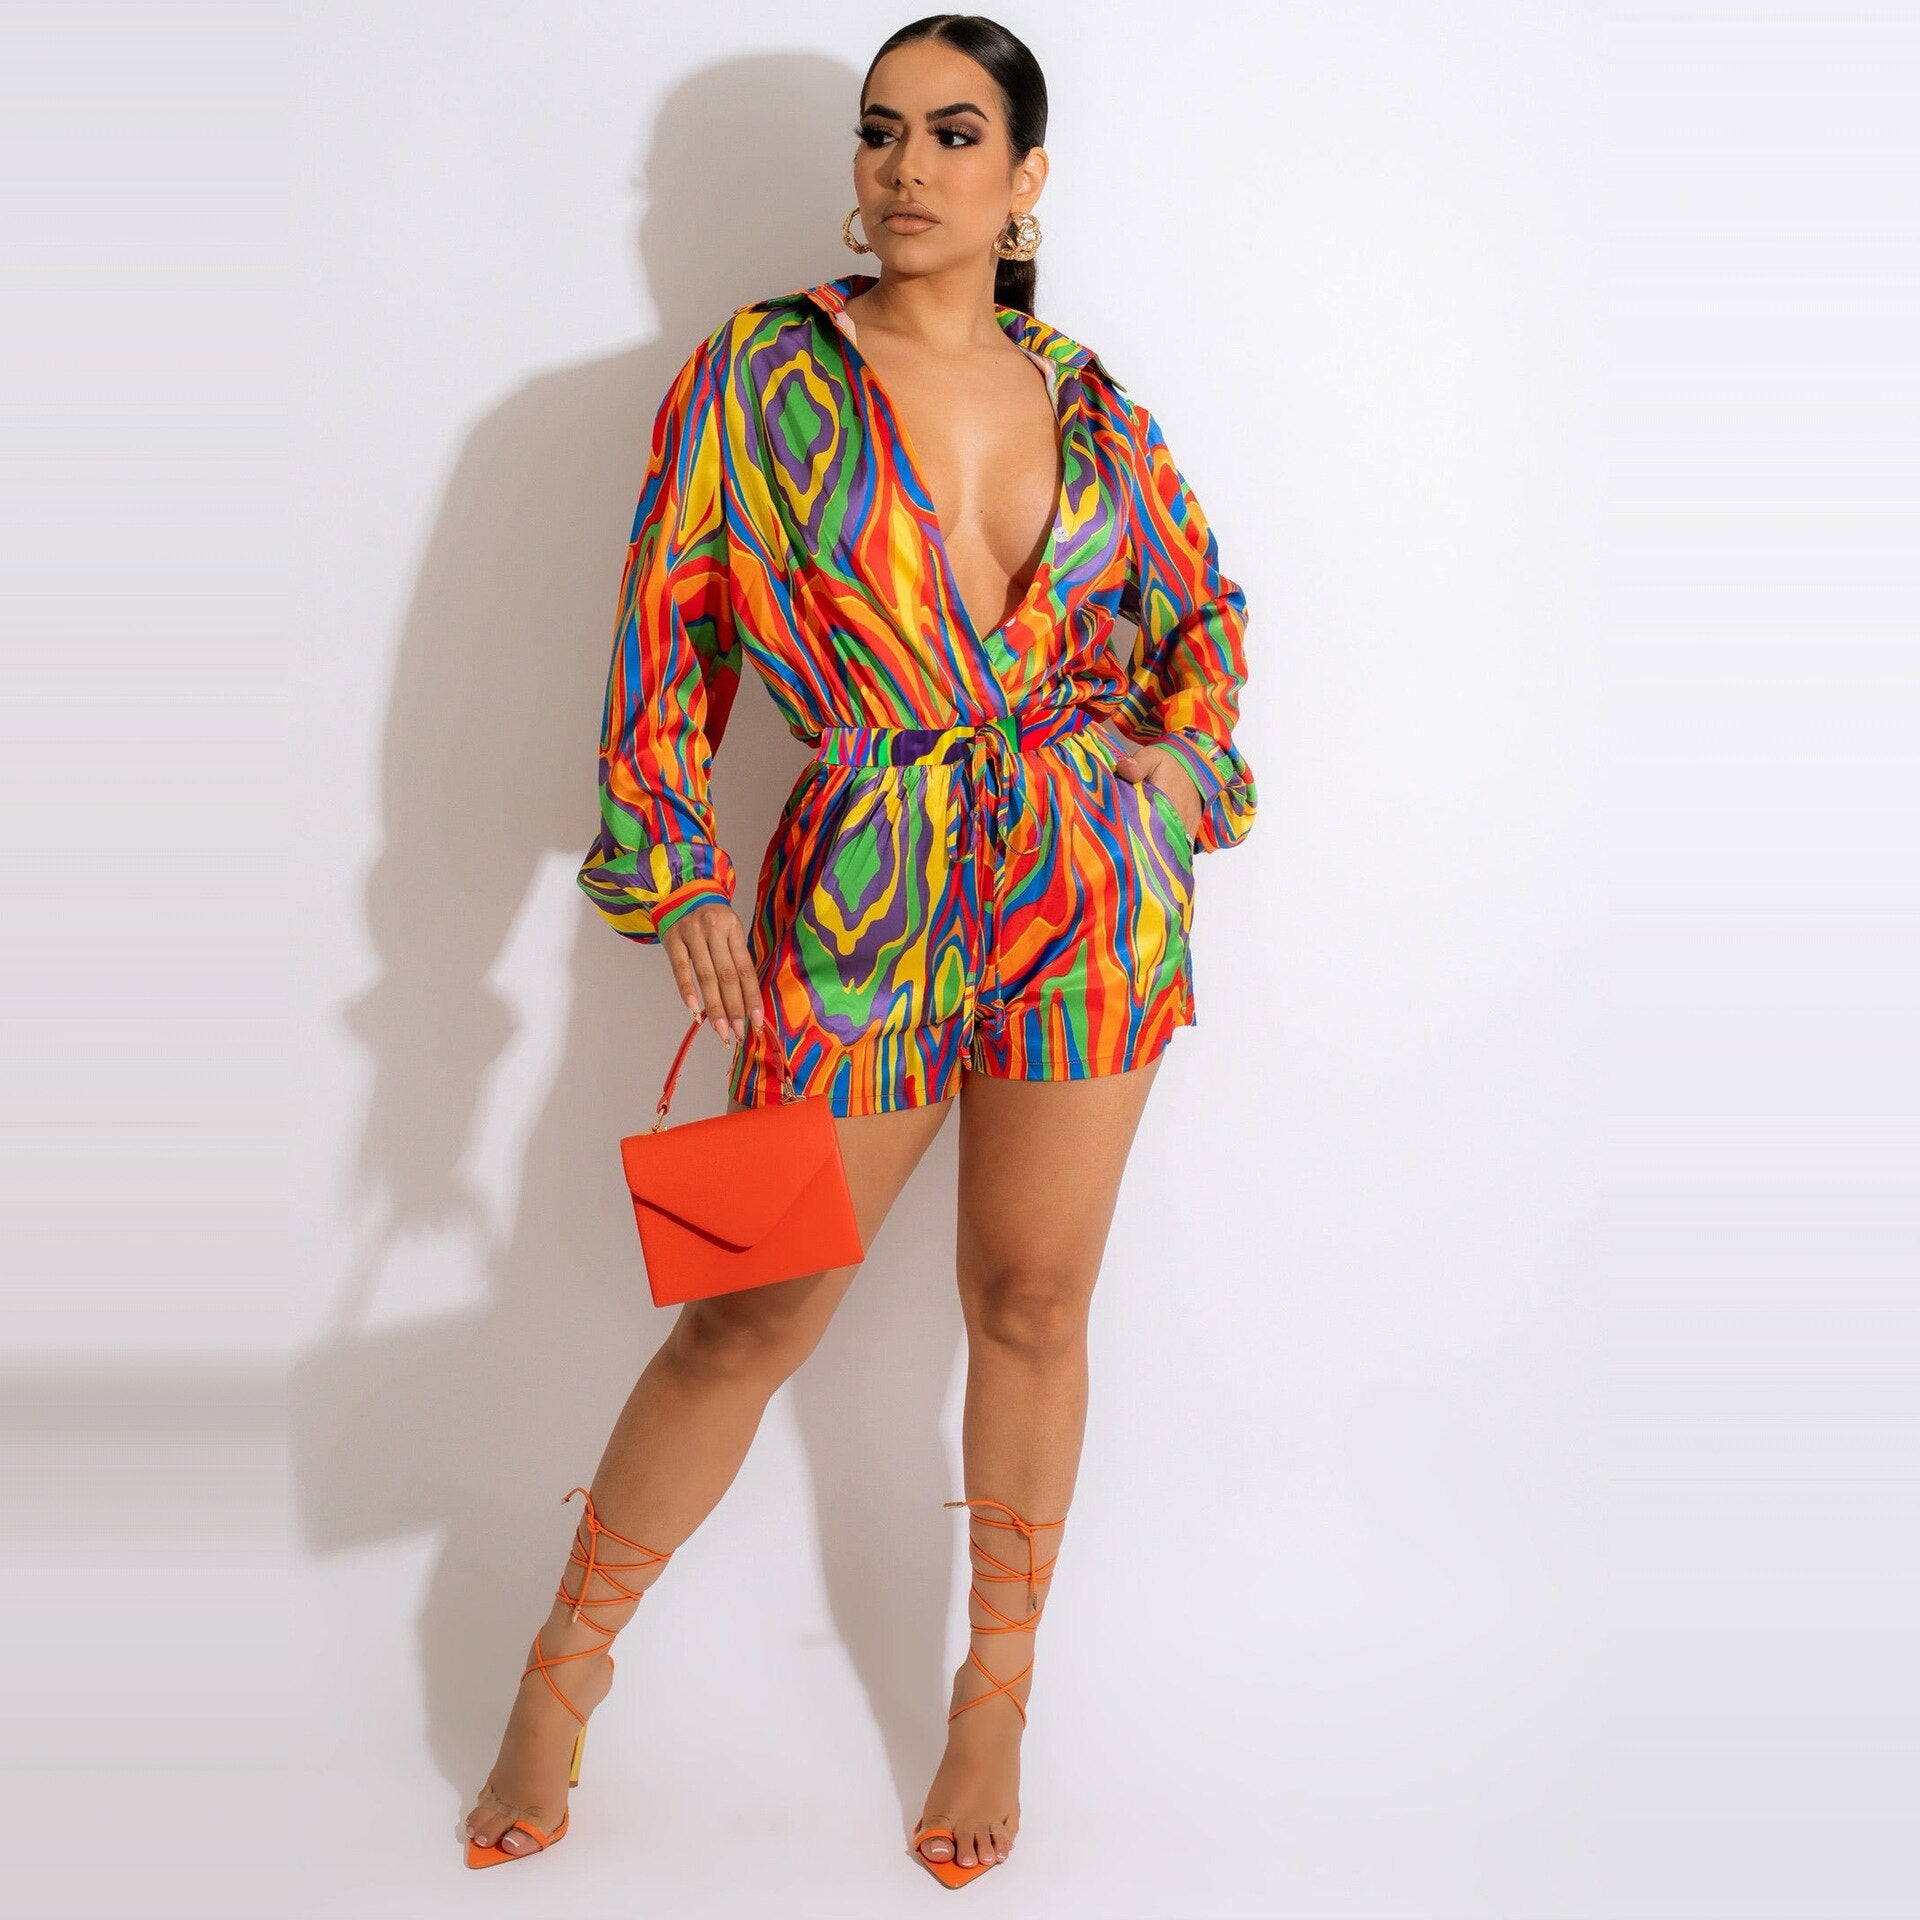 Casual Tie Dye Printed Lapel Long Sleeve Shirt Tops and Shorts Suit